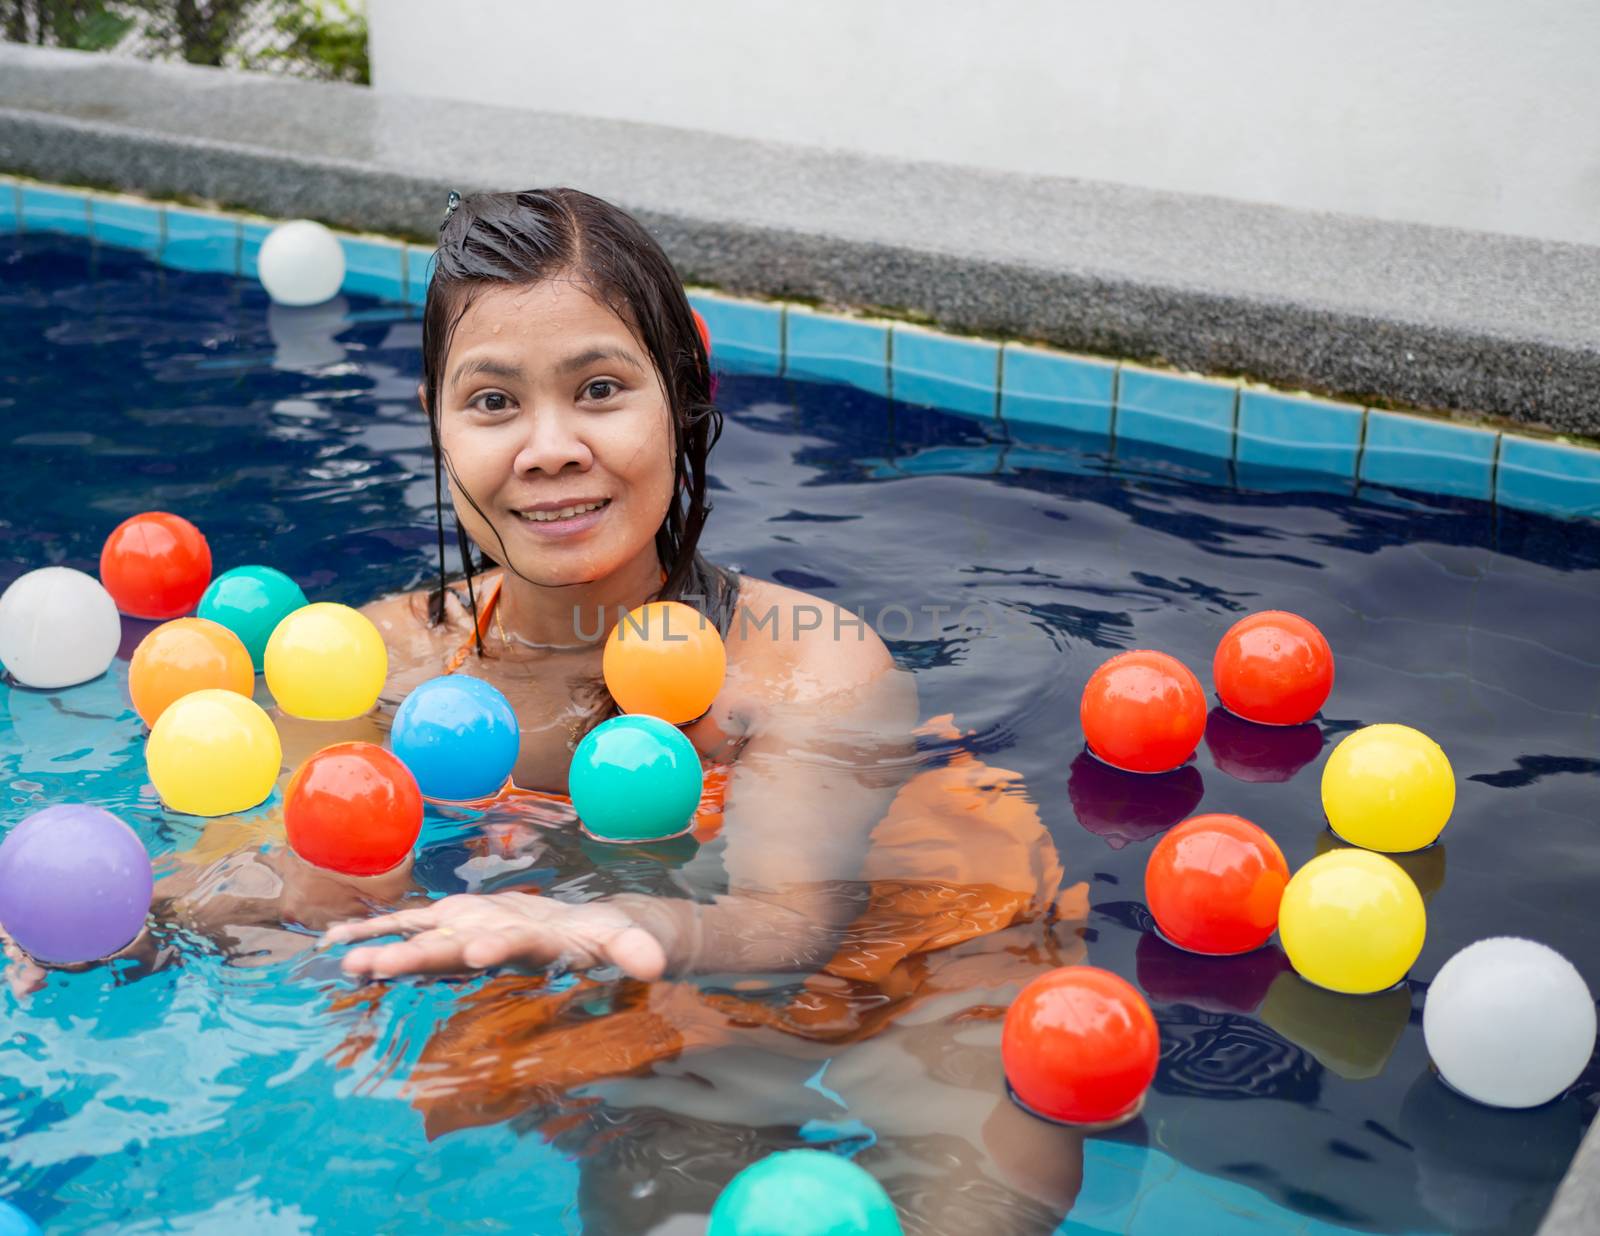 A woman playing in the ball in the pool by Unimages2527